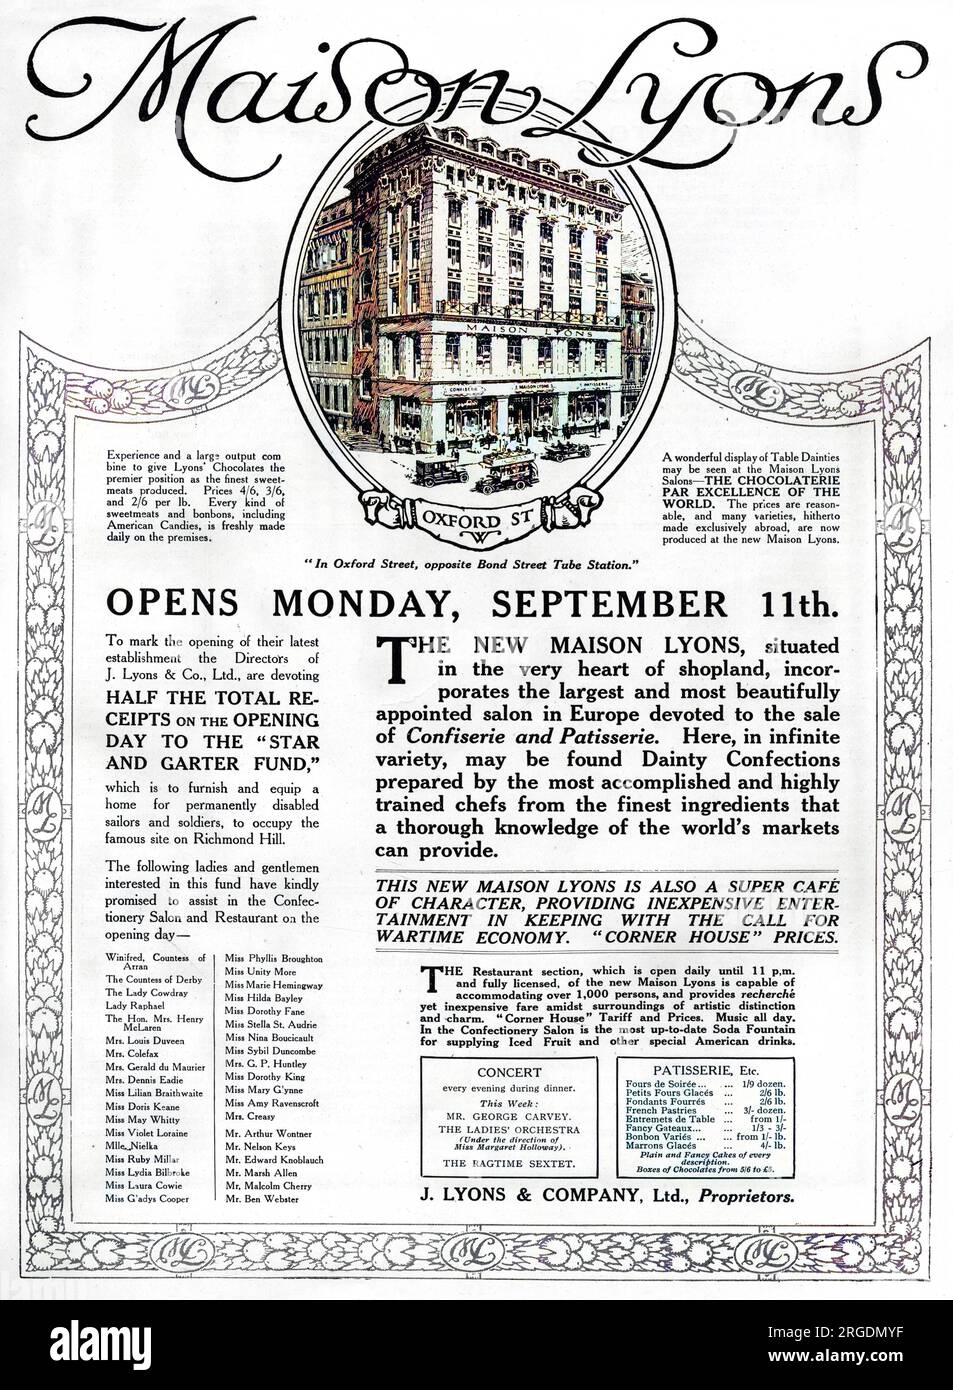 Advertisement for the opening of the latest branch of J. Lyons & Co, in Oxford Street, London, opposite Bond Street tube station.  Devoted to the sale of Confiserie and Patisserie, the cafe offered 'dainty confections prepared by the most accomplished and highly trained chefs.'  The restaurant section was open daily until 11 pm and full licensed and capable of accommodating 1000 people.  To mark the opening of their latest establishment the Director were devoting half the total receipts on the opening day to the Star and Garter Fund to furnish and equip a home for permanently disabled sailors Stock Photo